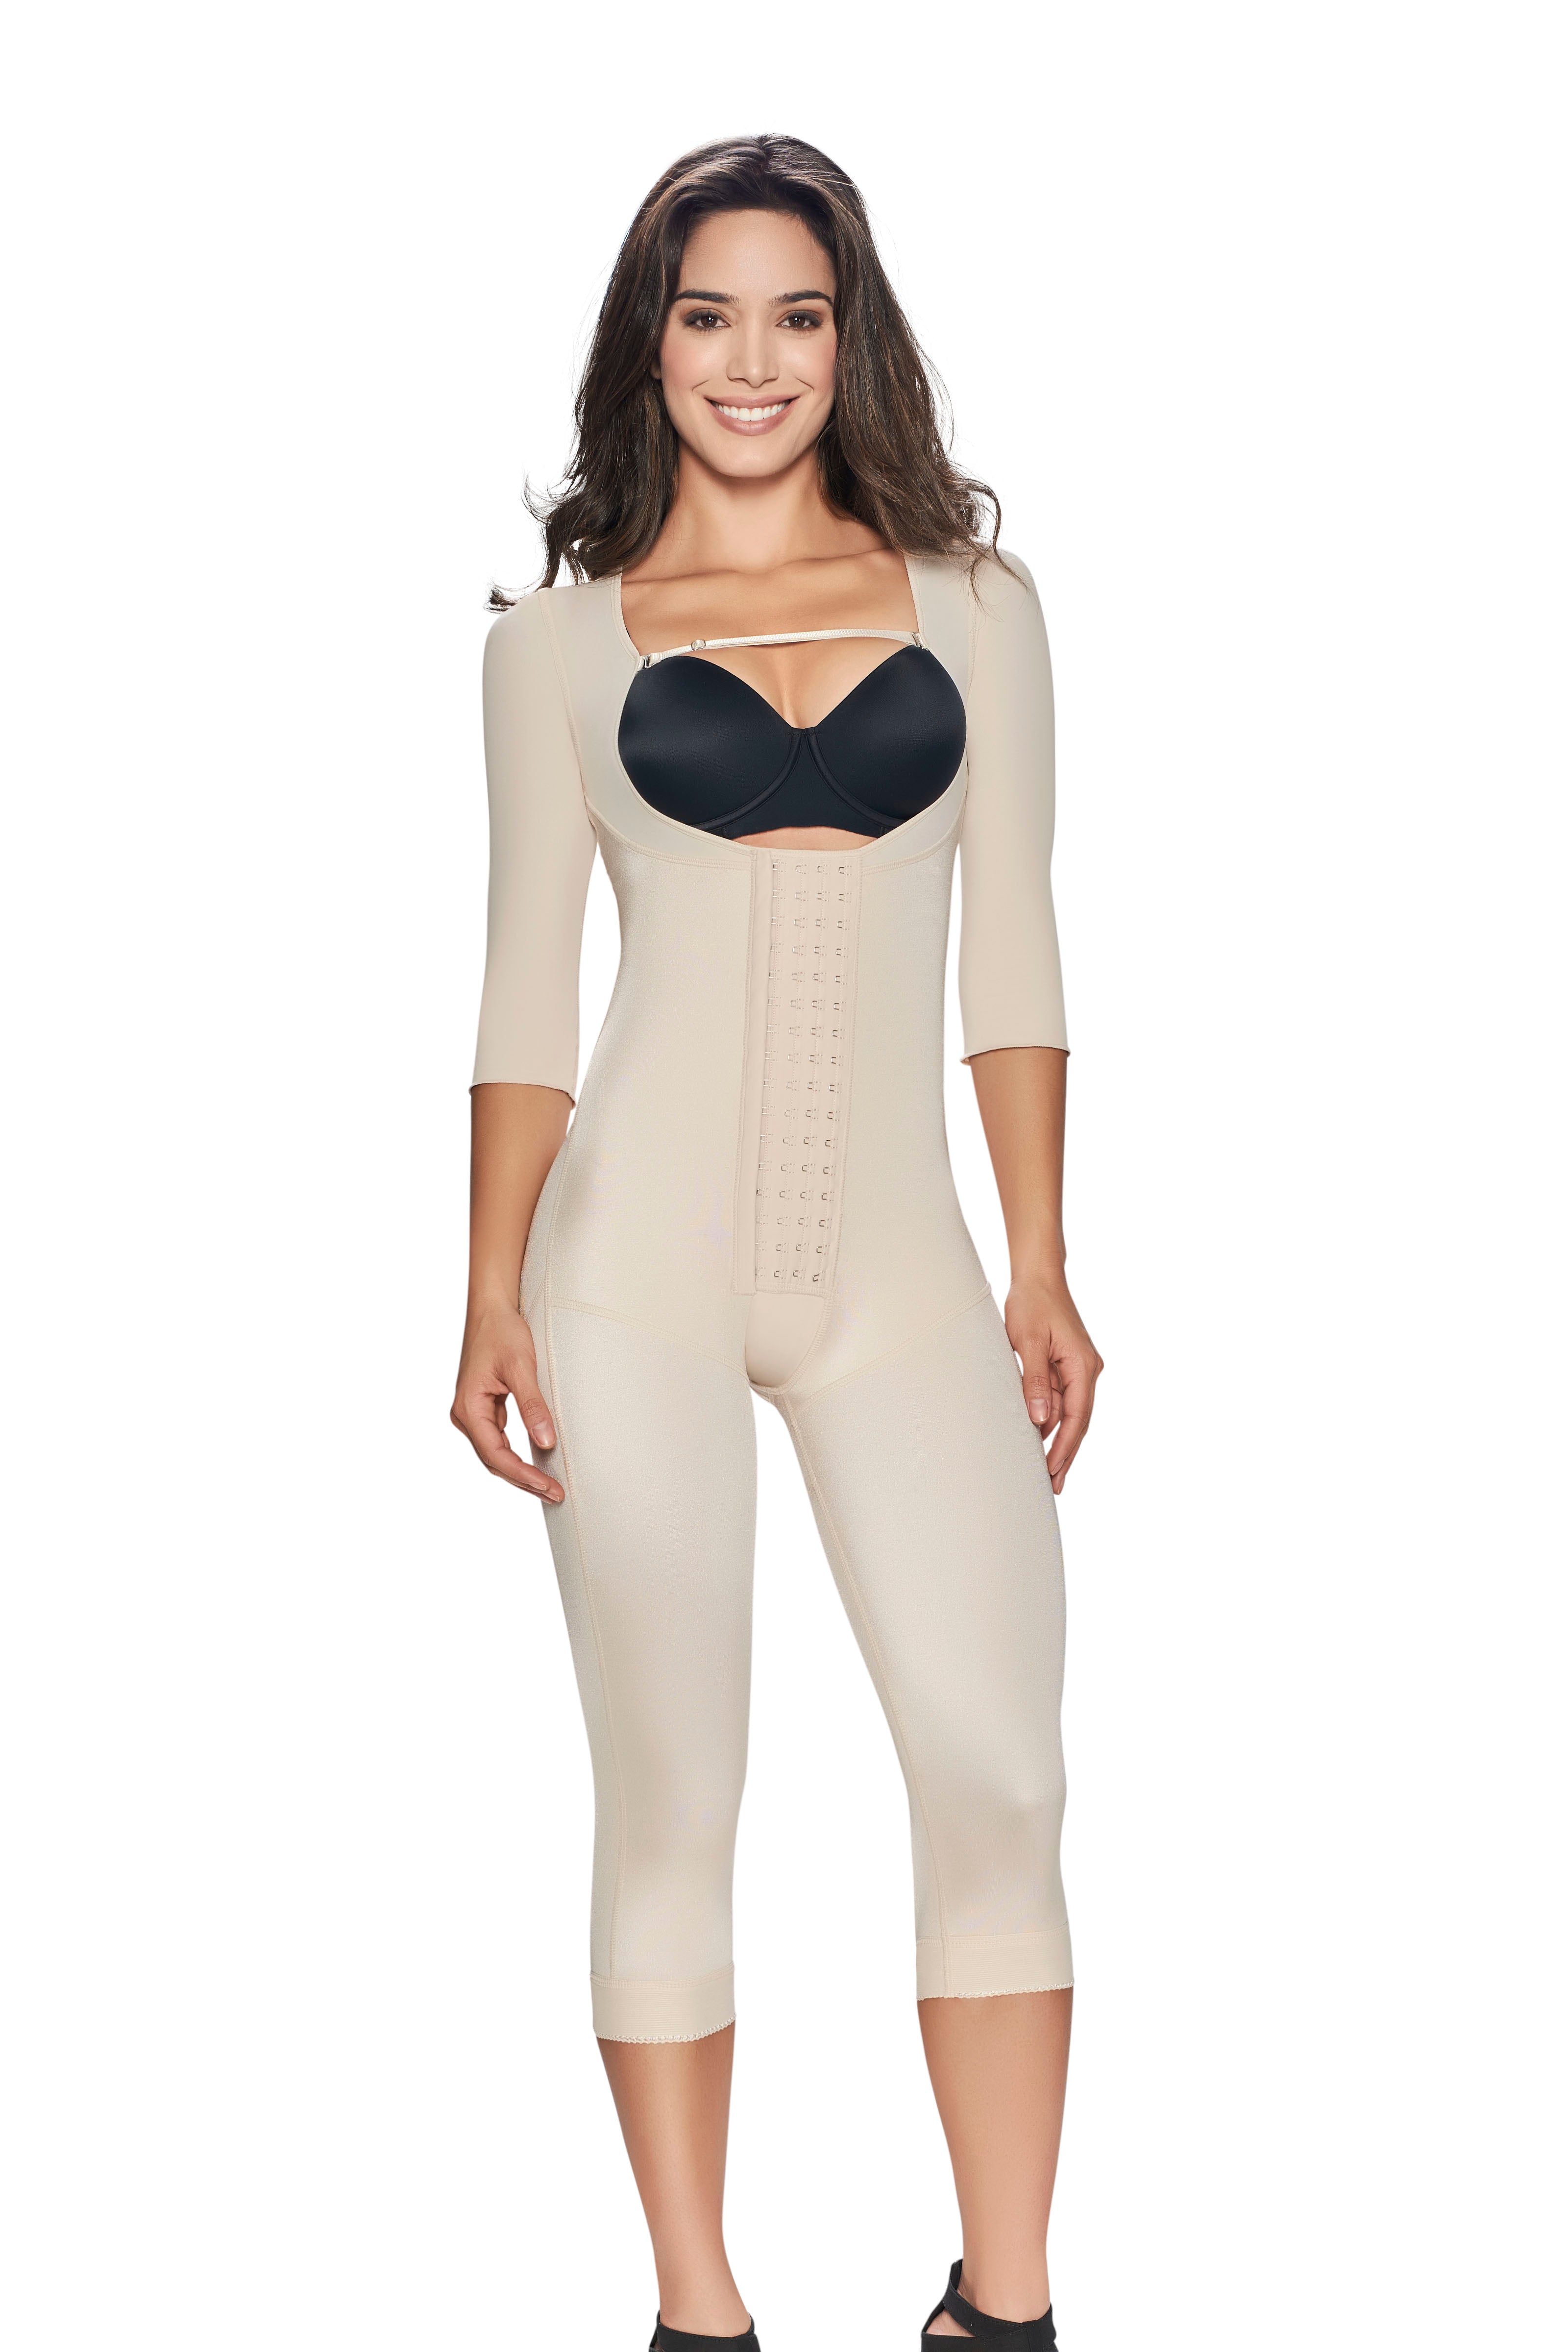 https://www.shapersfit.com/cdn/shop/products/1254-Nude-Post-Surgical-Body-Shaper-with-ArmCompression-Shapersfit.jpg?v=1598216080